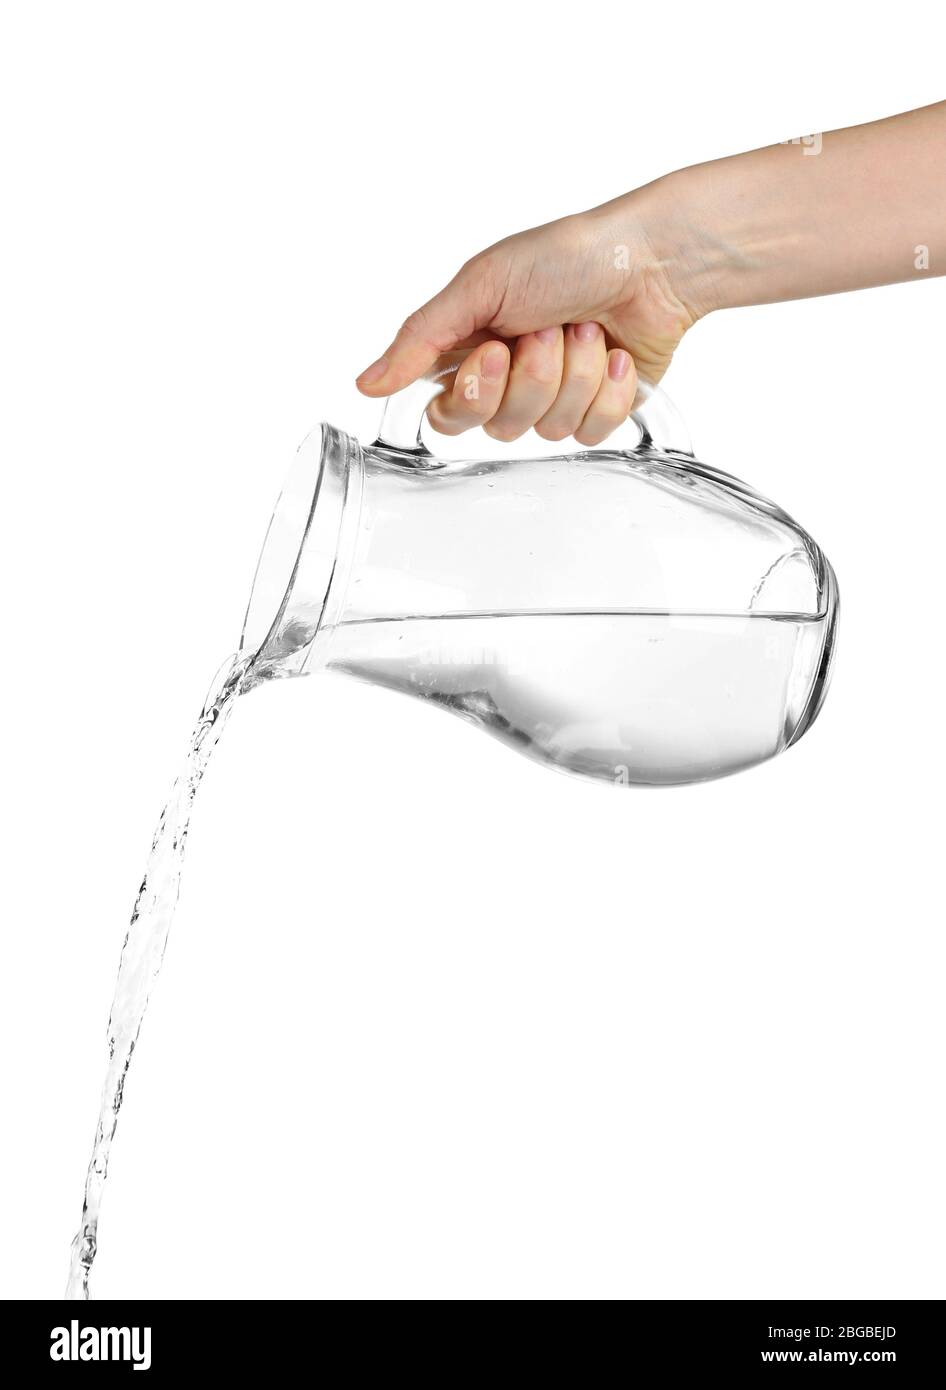 Water pouring into a pitcher. Stock Photo by ©jurisam 84820504